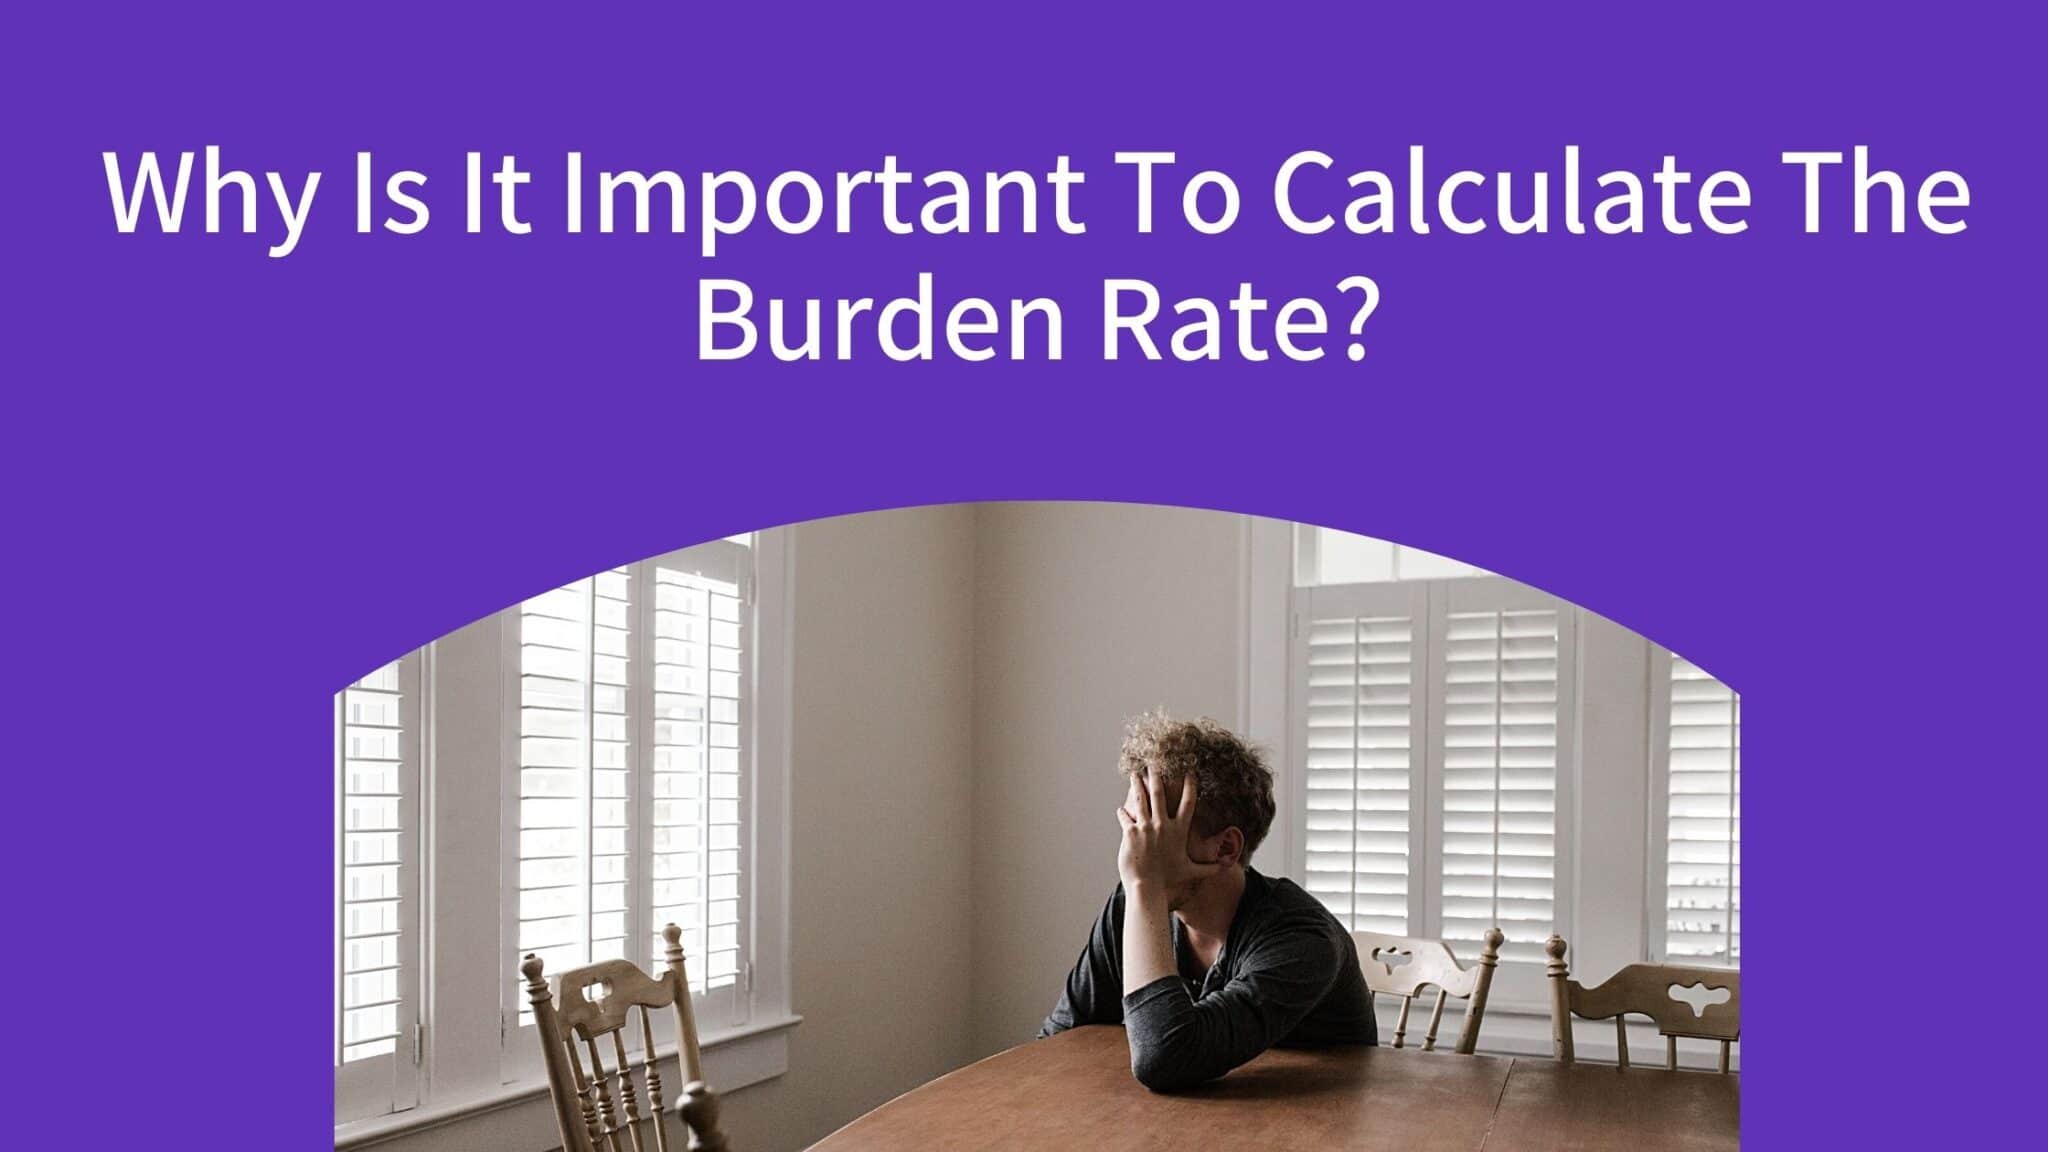 Why Is It Important To Calculate The Burden Rate-7802d72d